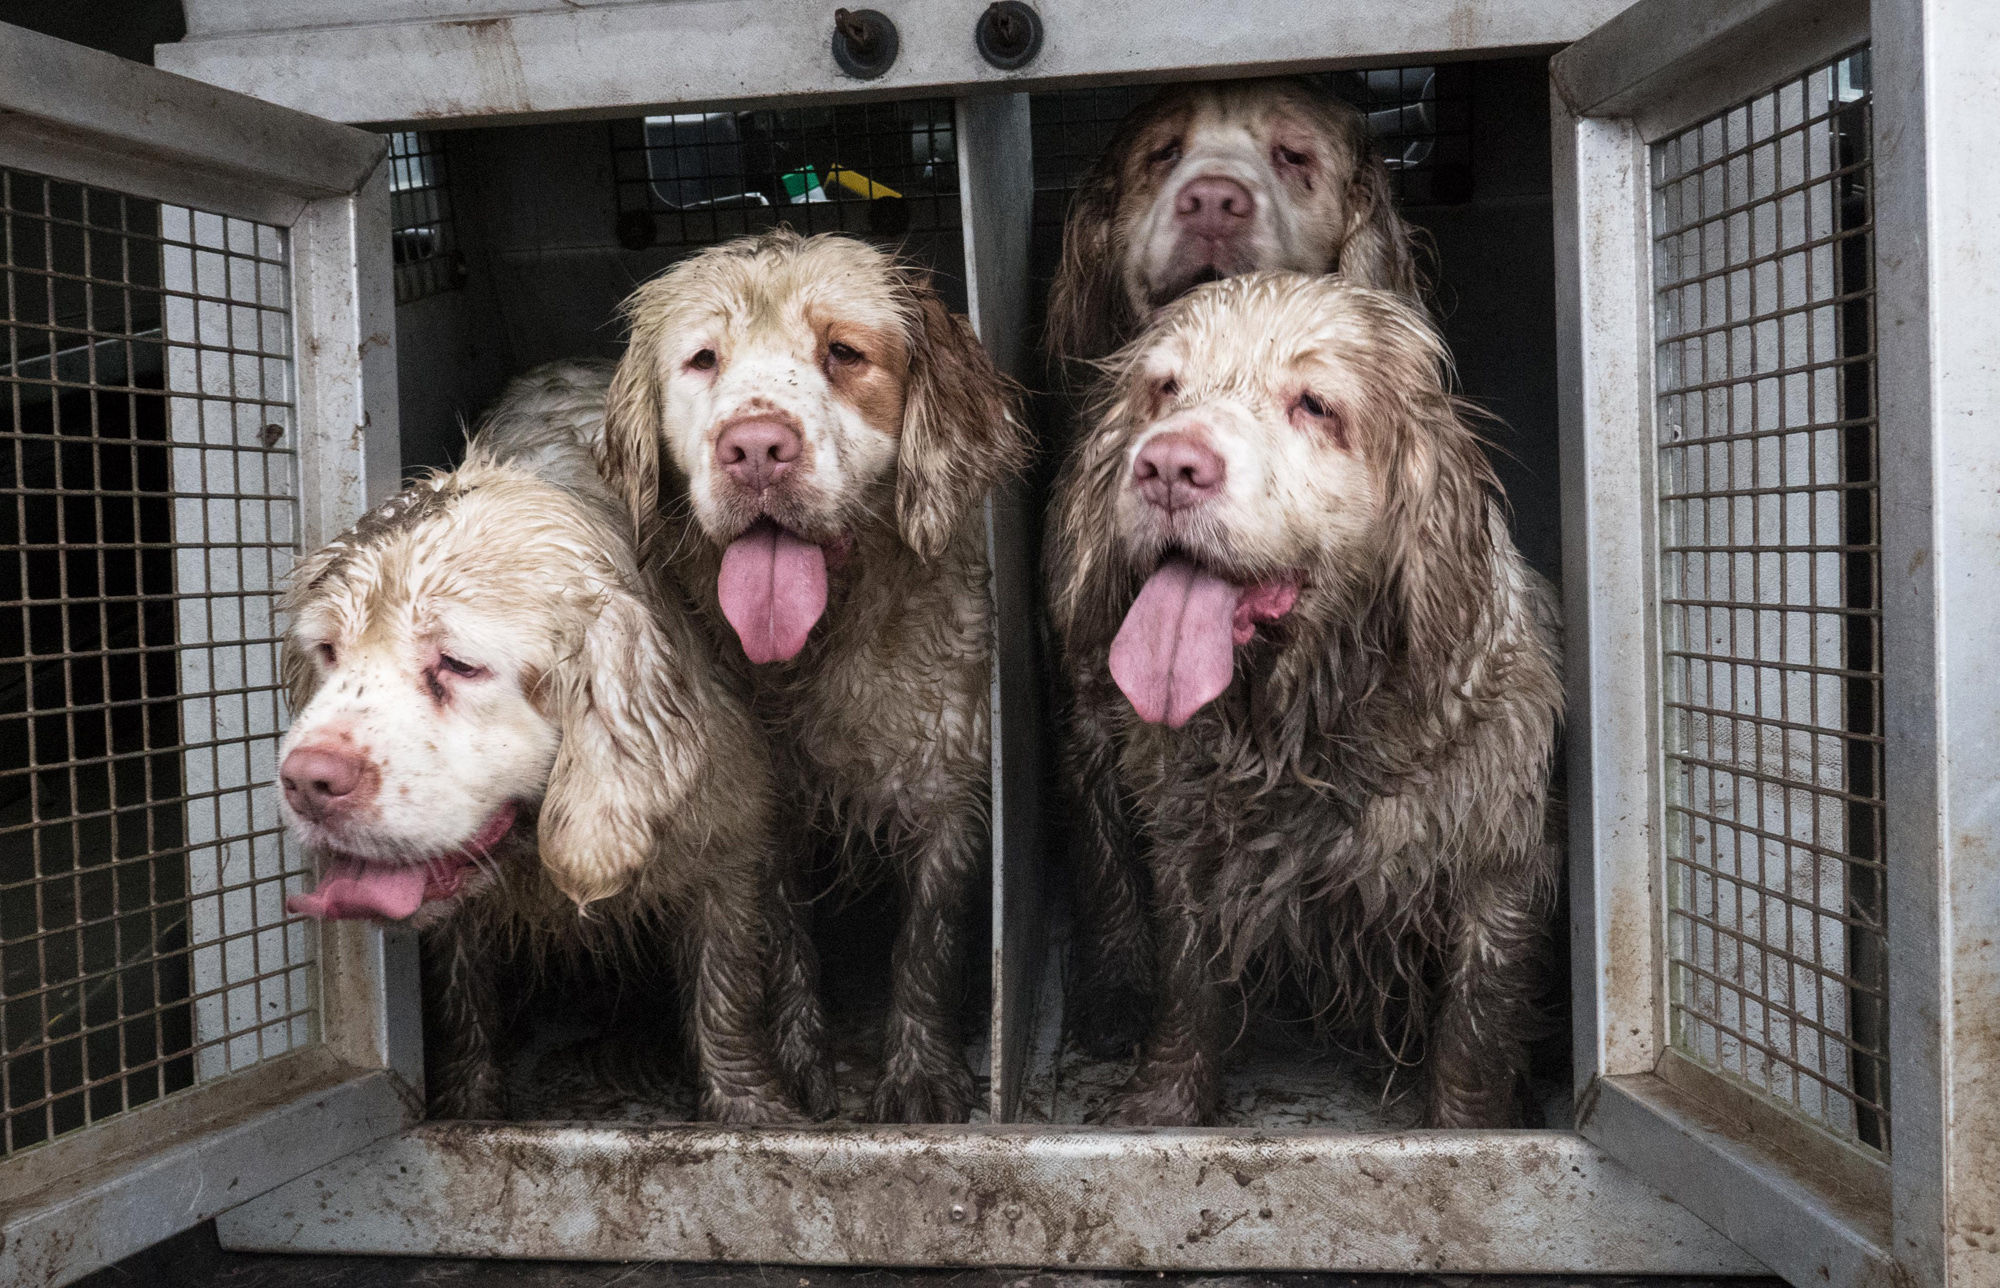 Also available in white - Four wet and muddy Clumber spaniels